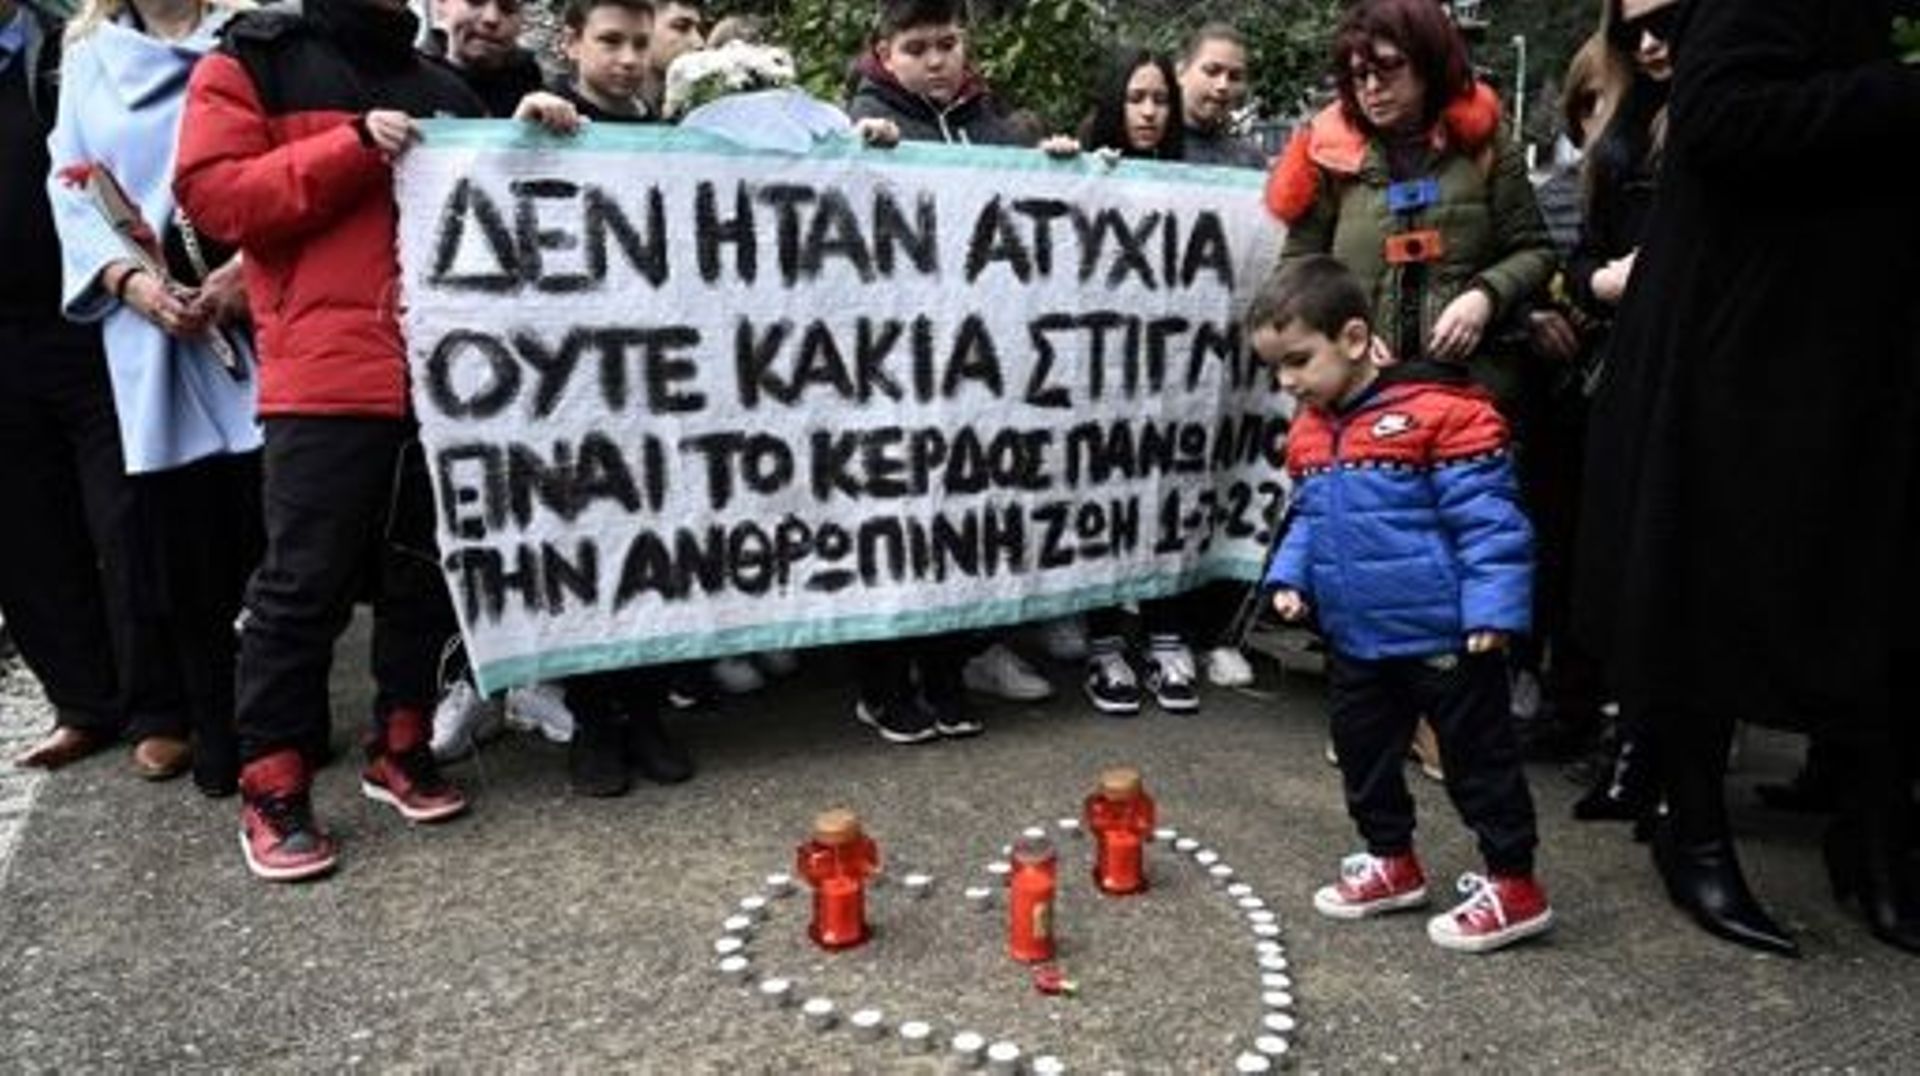 Members of the public hold a banner reading "I was not an accident or bad timing, it is the money above human life" at the railway station of Rapsani, north Greece, on March 5, 2023, during a commemorative gathering for the victims of a deadly train crash